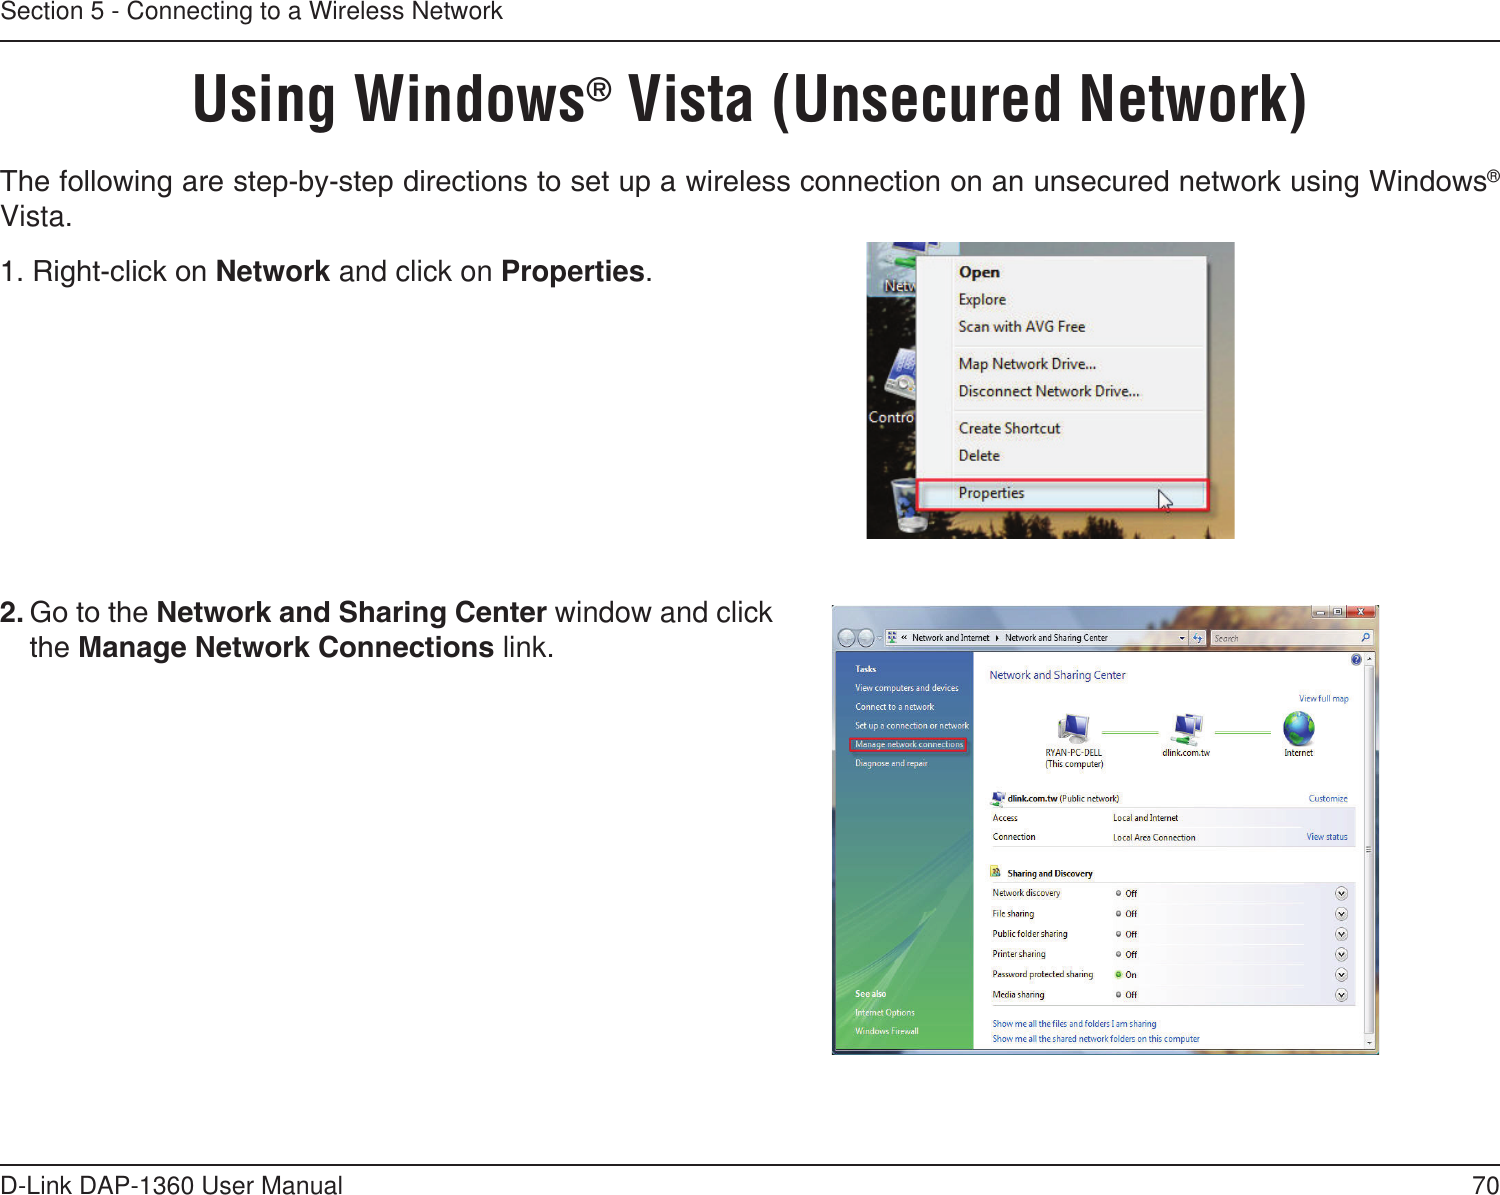 70D-Link DAP-1360 User ManualSection 5 - Connecting to a Wireless NetworkUsing Windows® Vista (Unsecured Network)The following are step-by-step directions to set up a wireless connection on an unsecured network using Windows® Vista.2. Go to the Network and Sharing Center window and click the Manage Network Connections link. 1. Right-click on Network and click on Properties.     